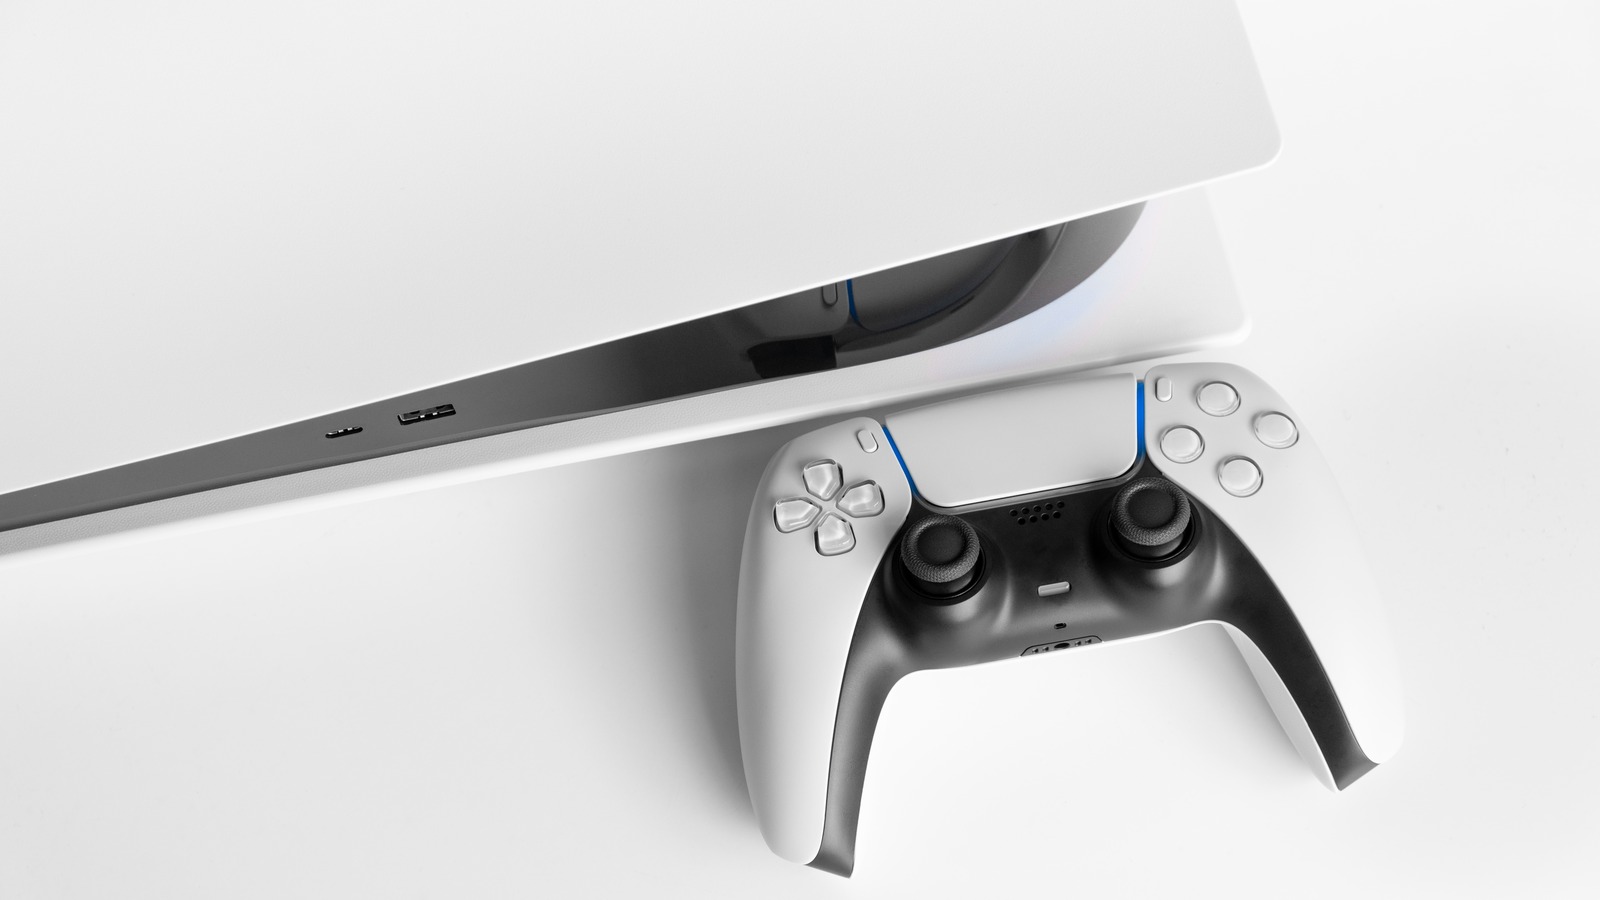 Pushing Buttons: Sony's PS5 price hike shows play does have limits